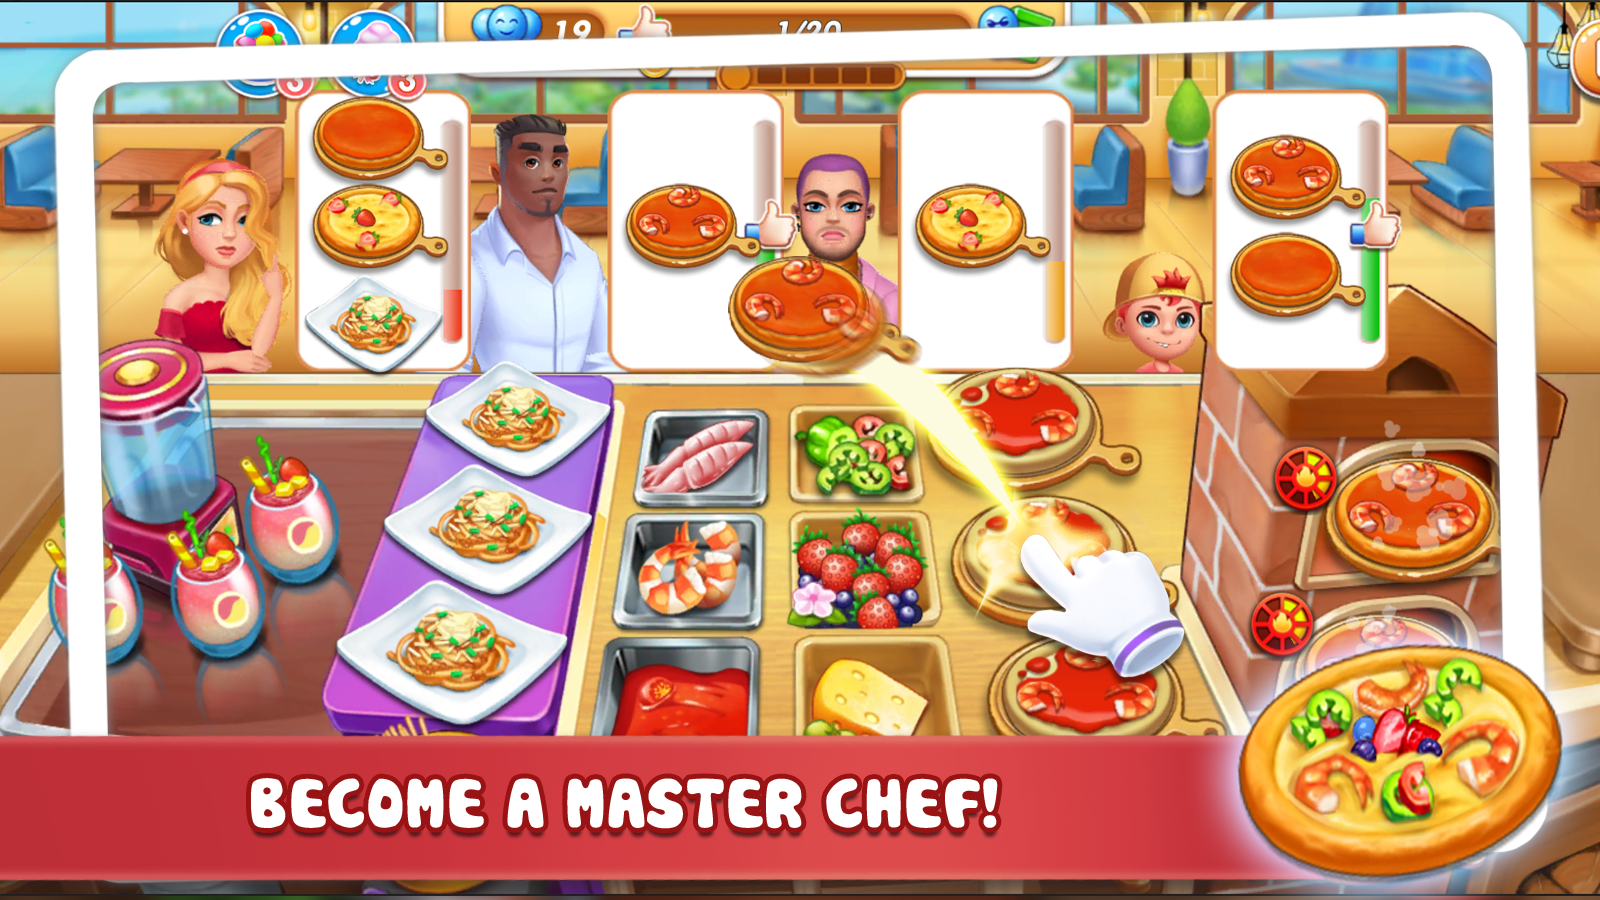 Screenshot 1 of Cooking Life : Master Chef at Fever Cooking Game 10.2